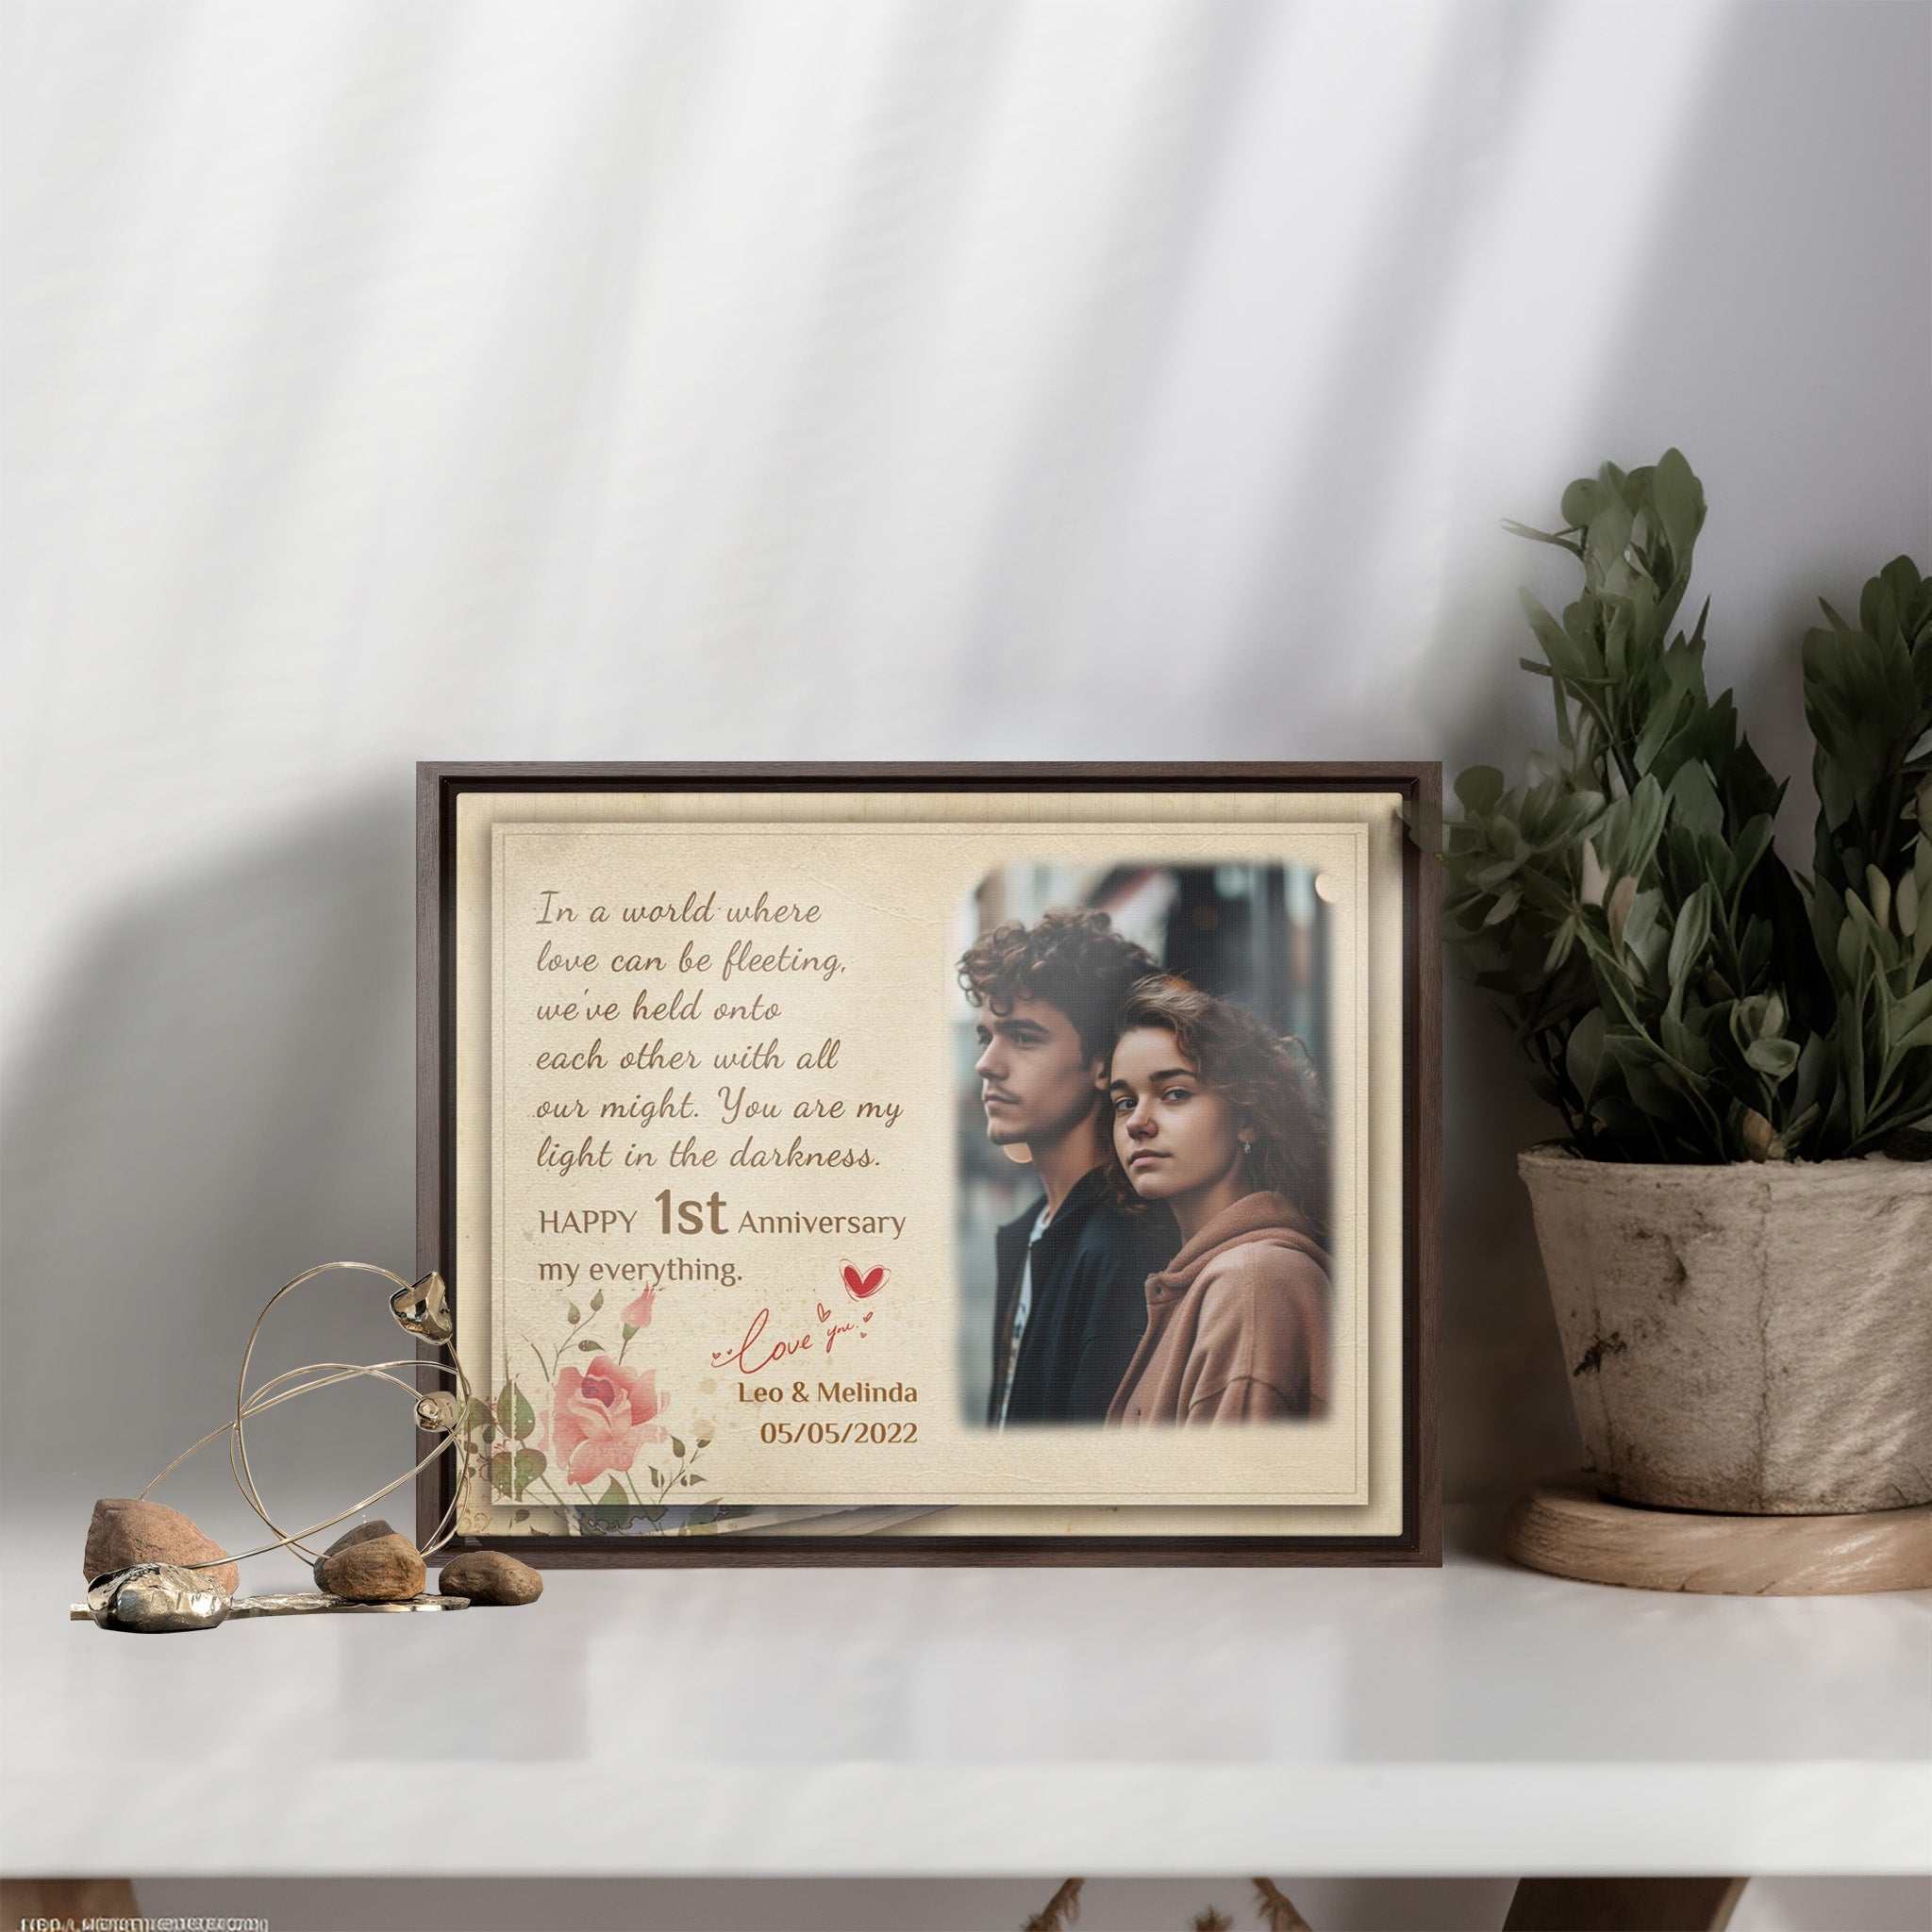 Letter To You, Type A - 1st Anniversary Custom Canvas Gift